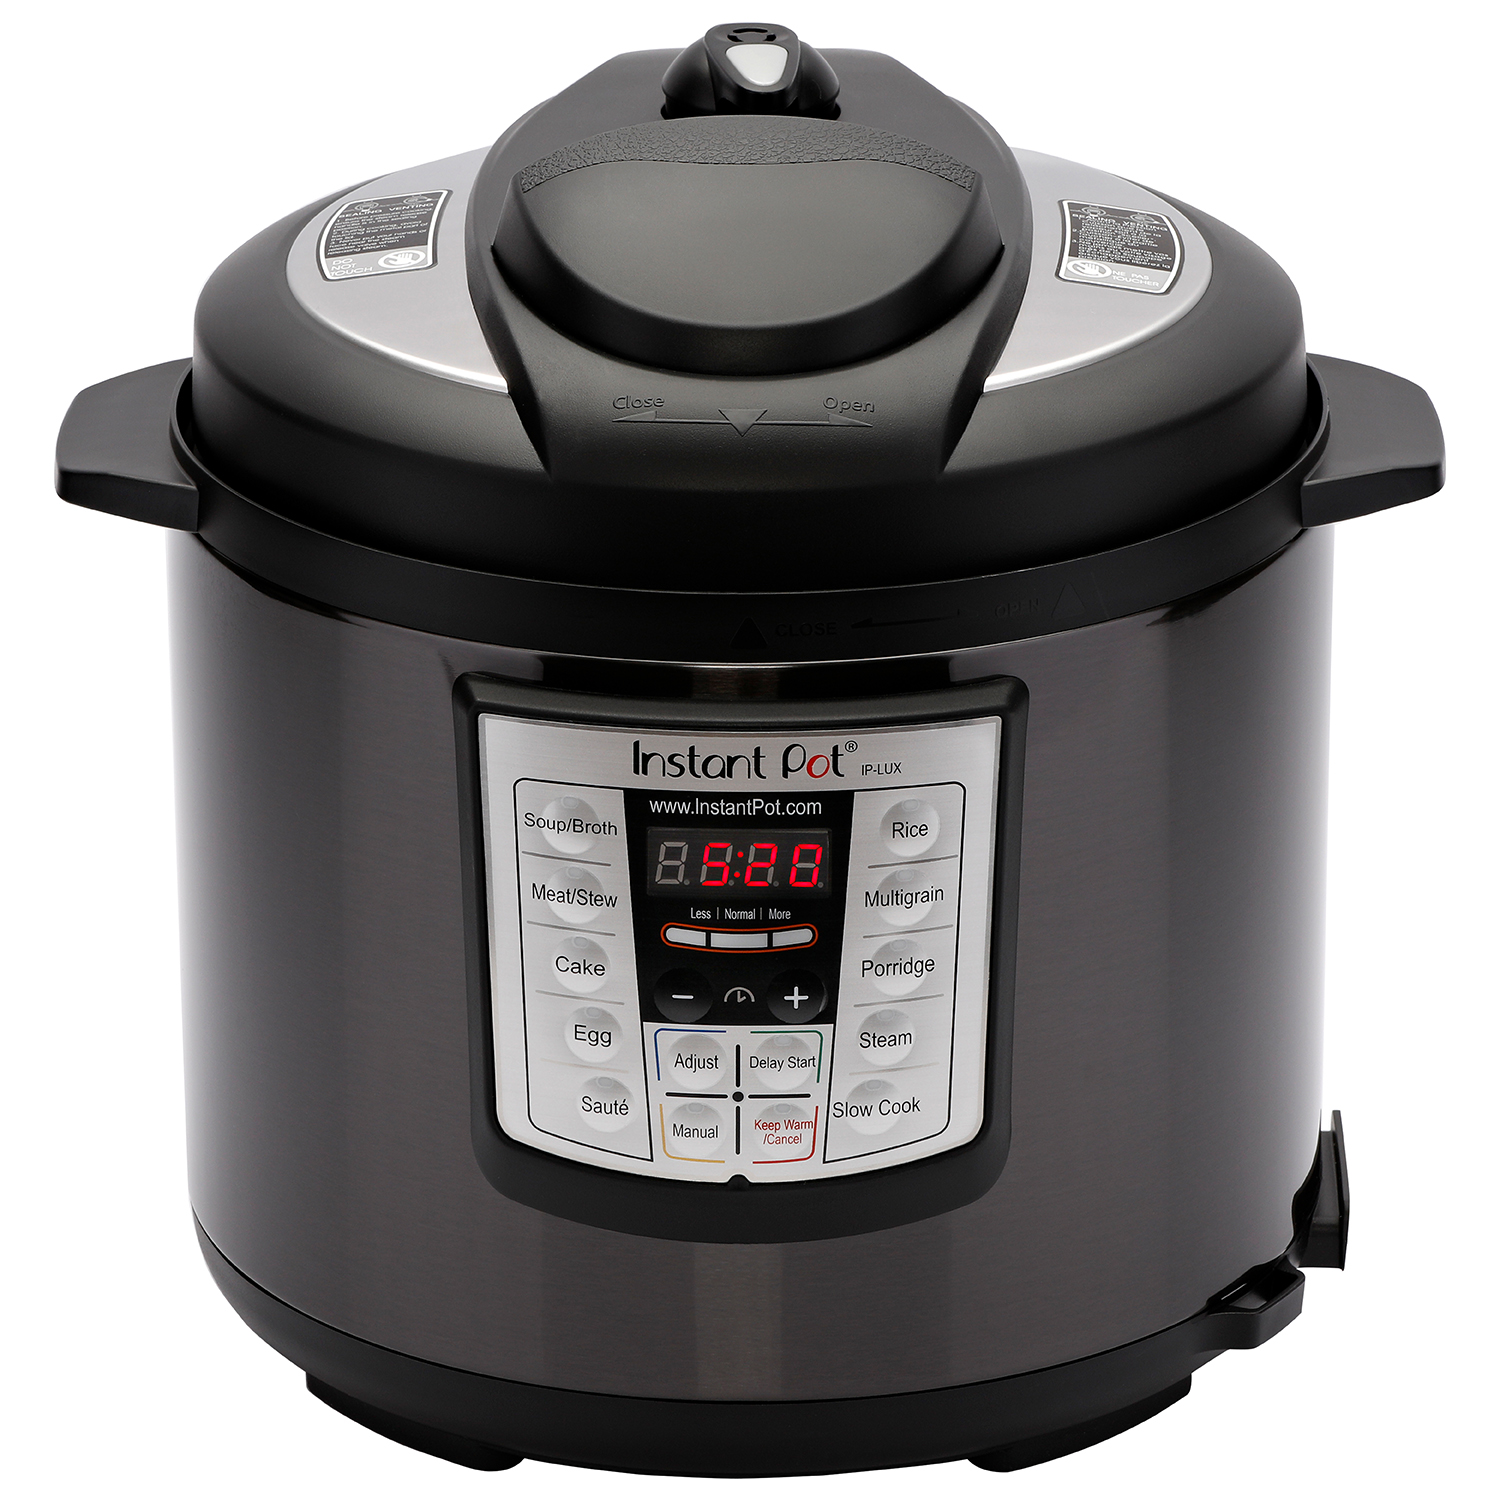 Instant Pot LUX60 Black Stainless Steel 6 Qt 6-in-1 Multi-Use Programmable Pressure Cooker